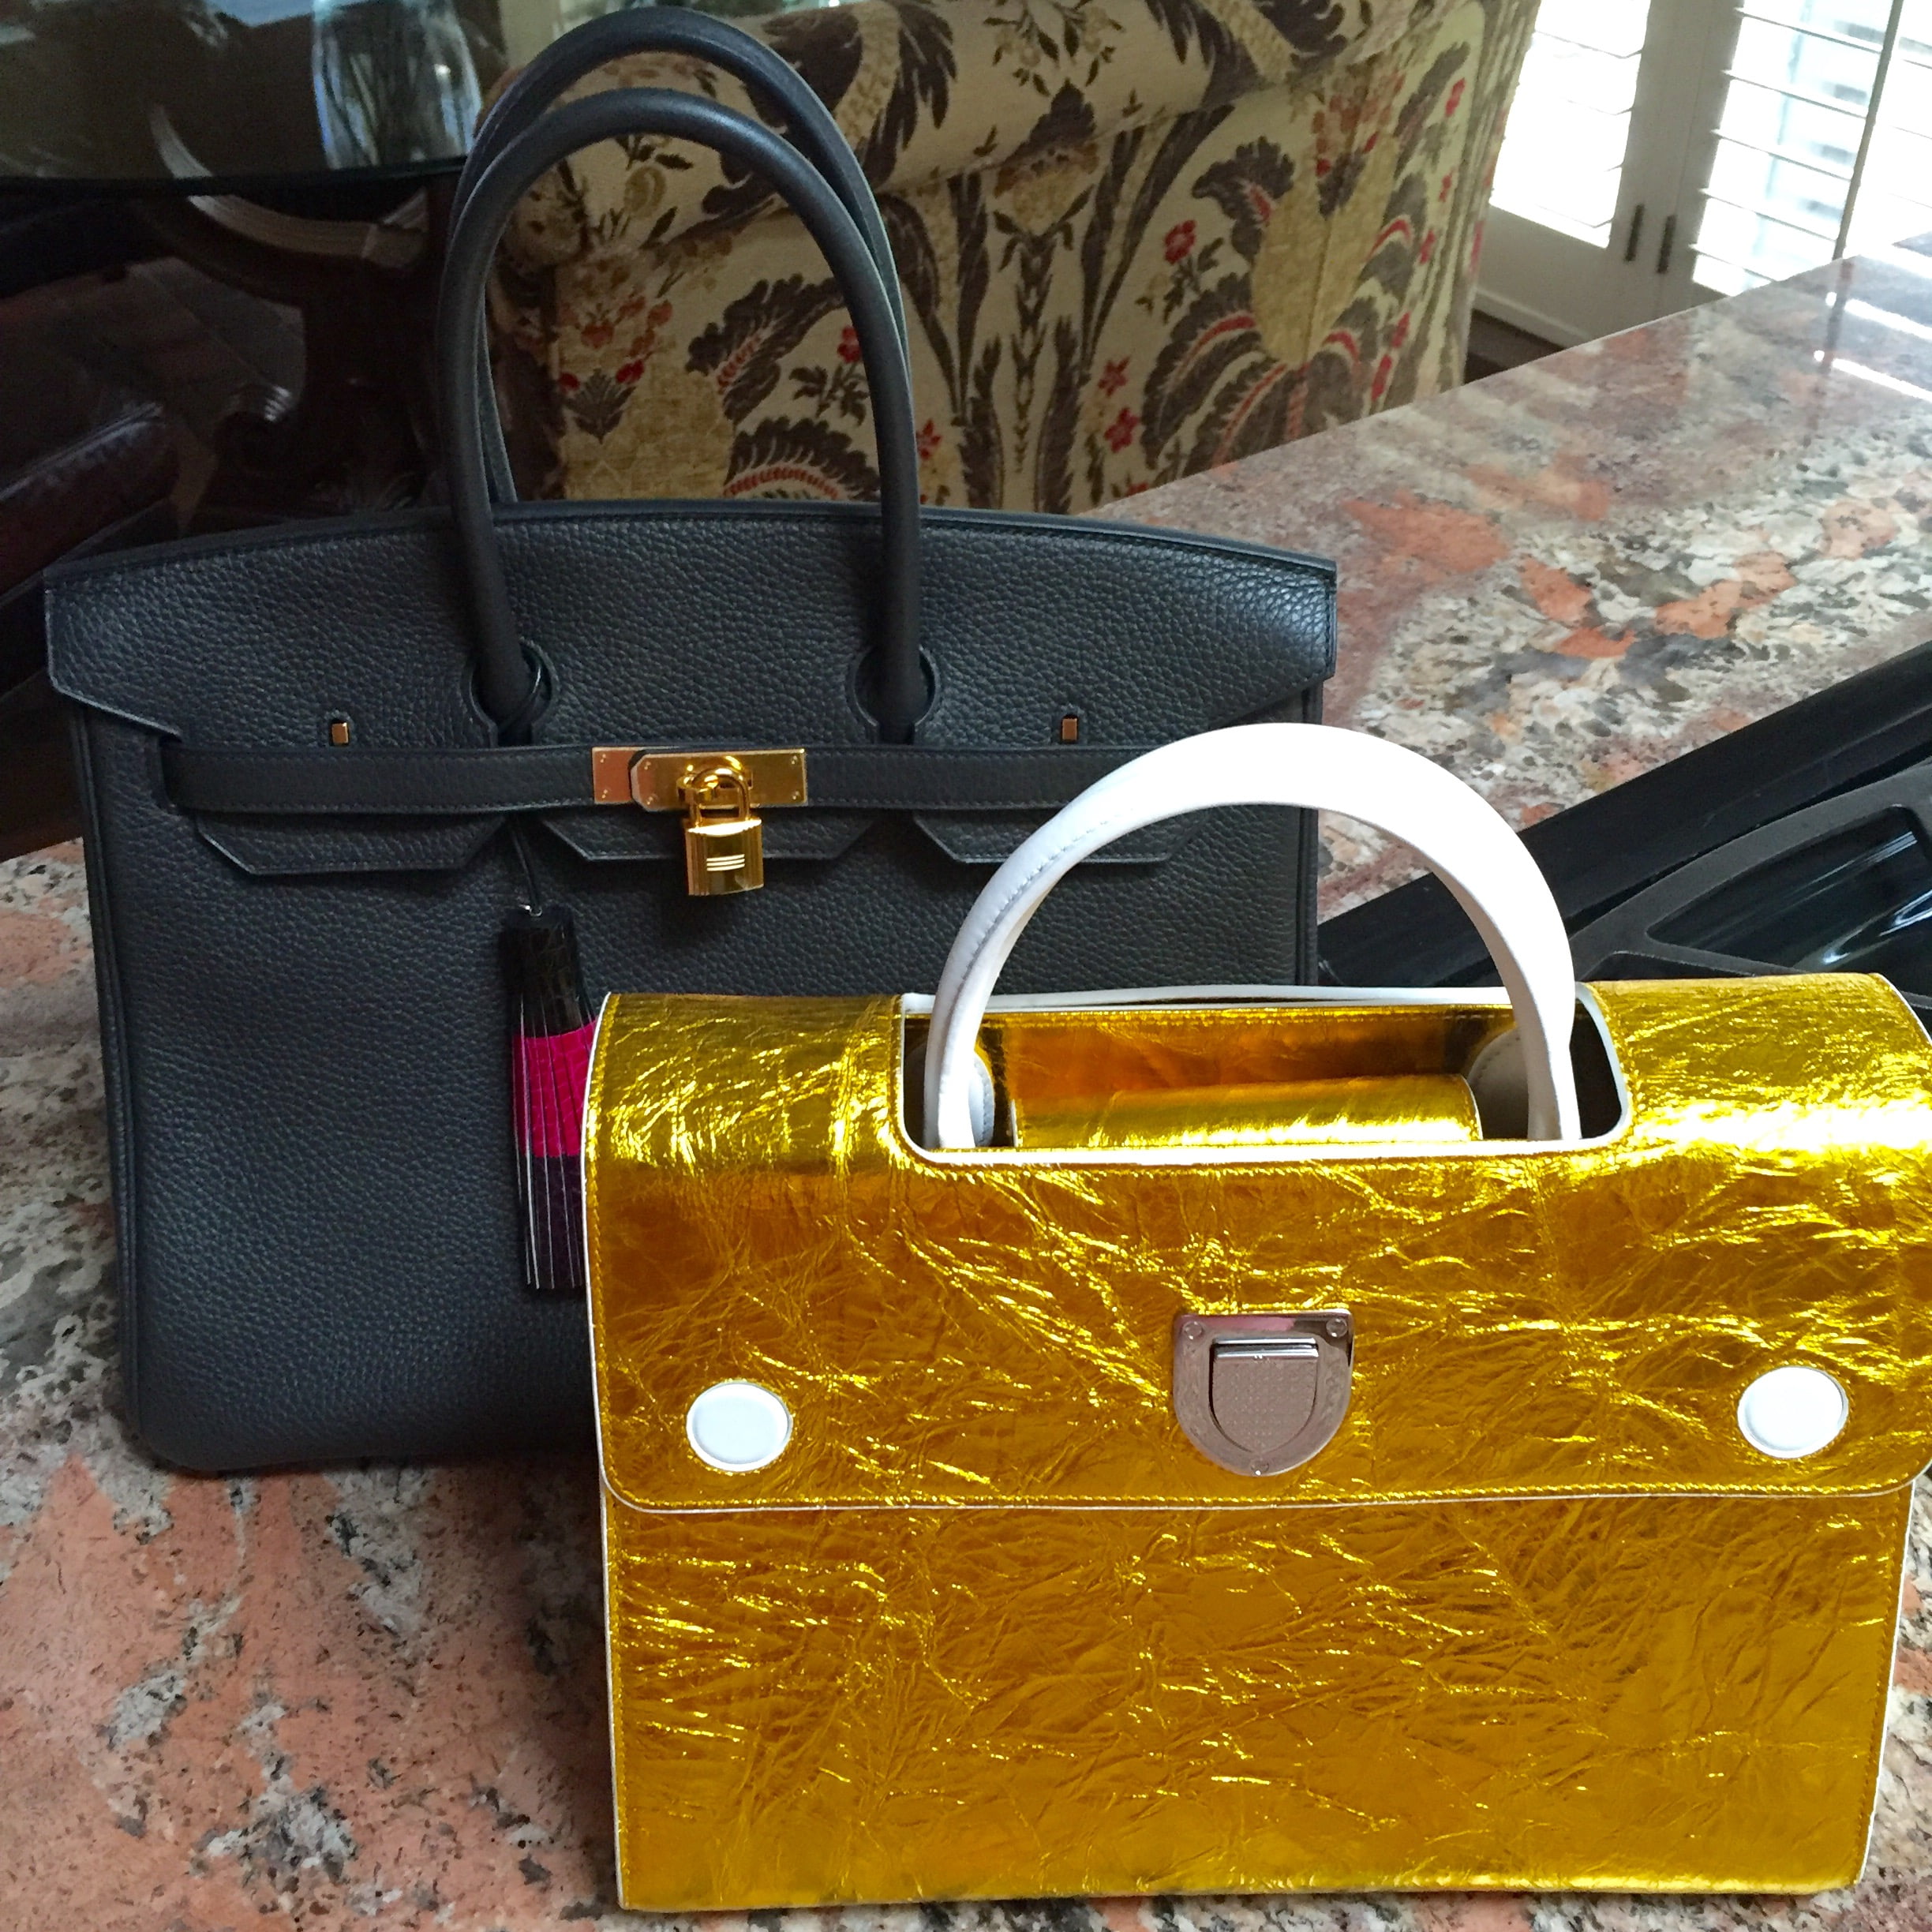 Not a birkin but sharing the differences between the #lvpochettefelici